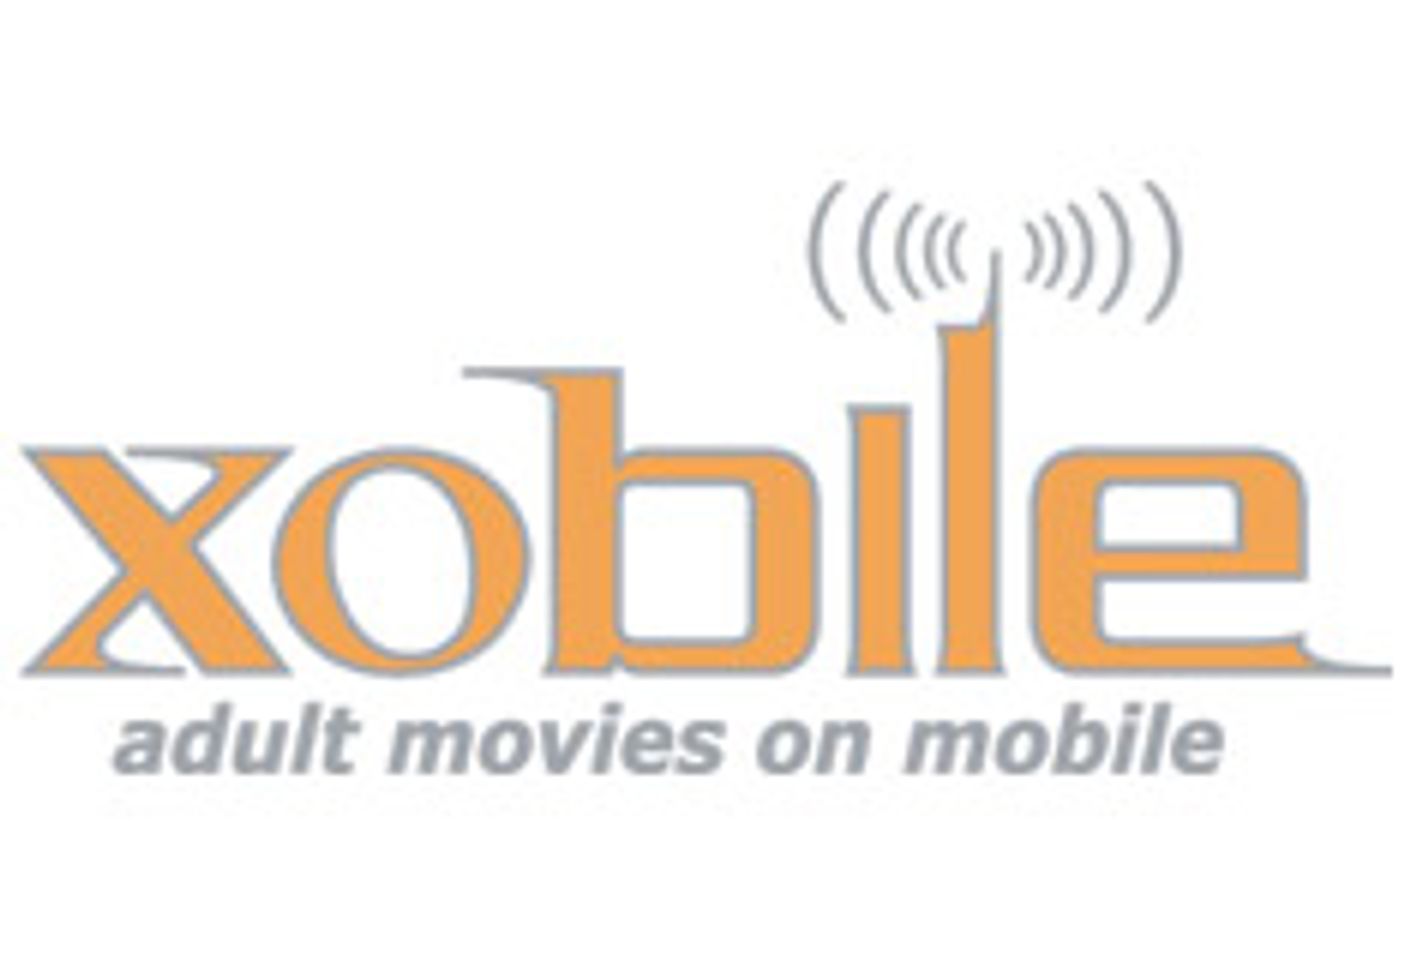 Xobile Infiltrates the iPod with PornMyPortable